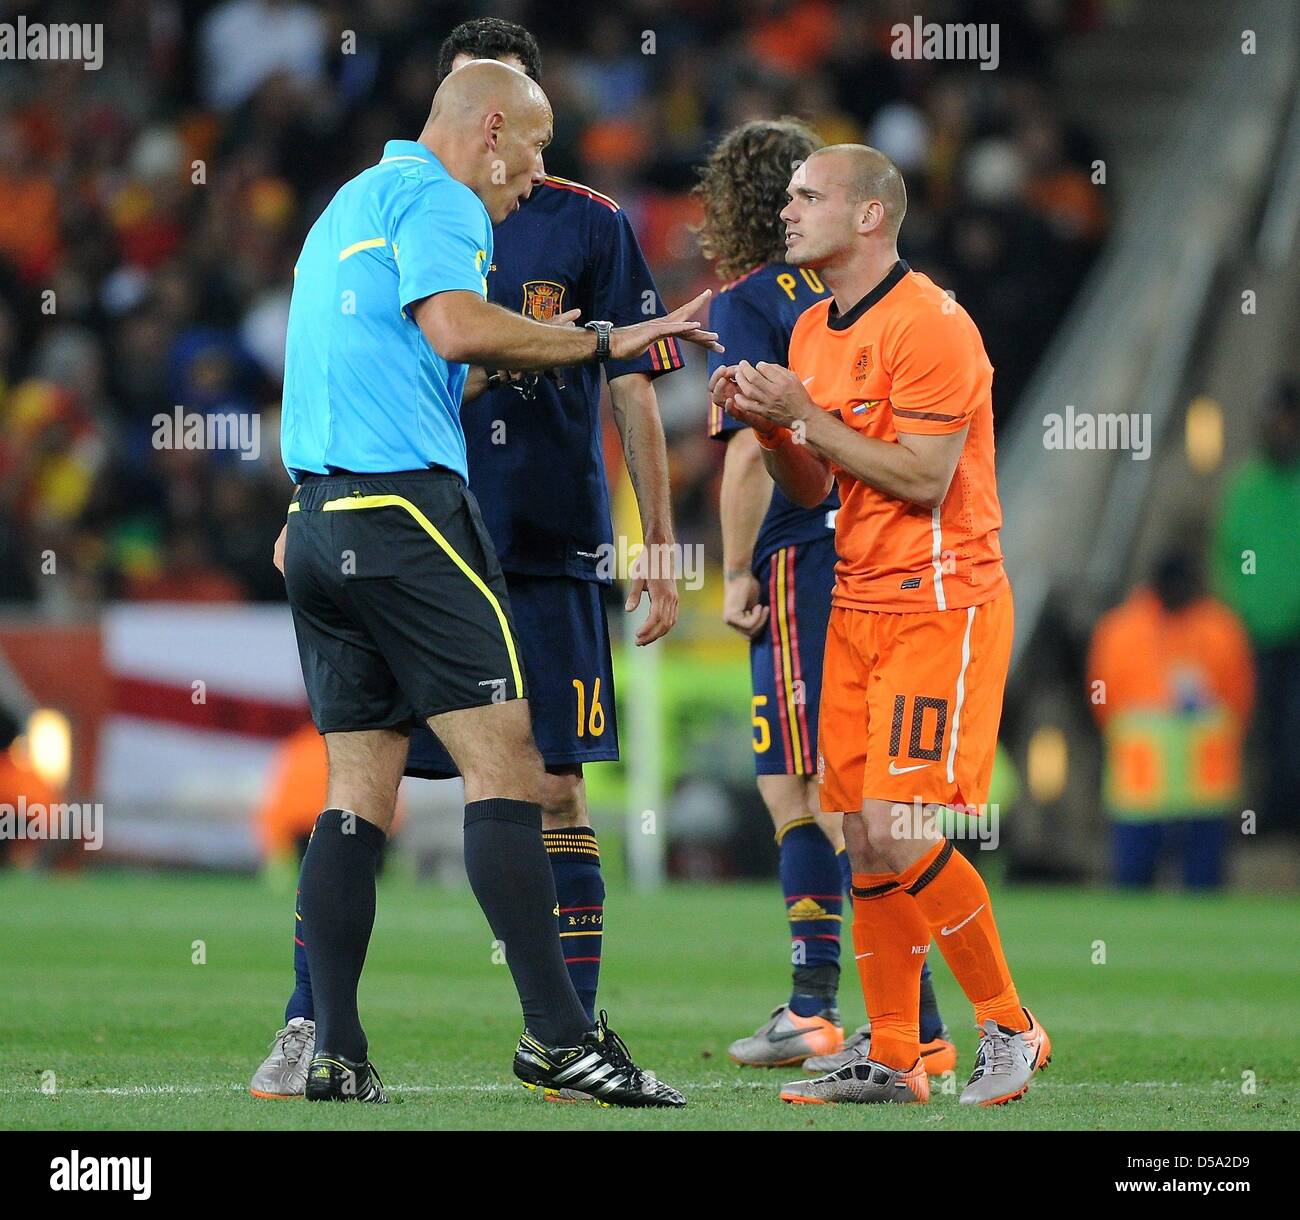 Dutch Wesley Sneijder (R) argues with English referee Howard Webb during the 2010 FIFA World Cup final match between the Netherlands and Spain at Soccer City Stadium in Johannesburg, South Africa 11 July 2010. Photo: Marcus Brandt dpa - Please refer to http://dpaq.de/FIFA-WM2010-TC  +++(c) dpa - Bildfunk+++ Stock Photo